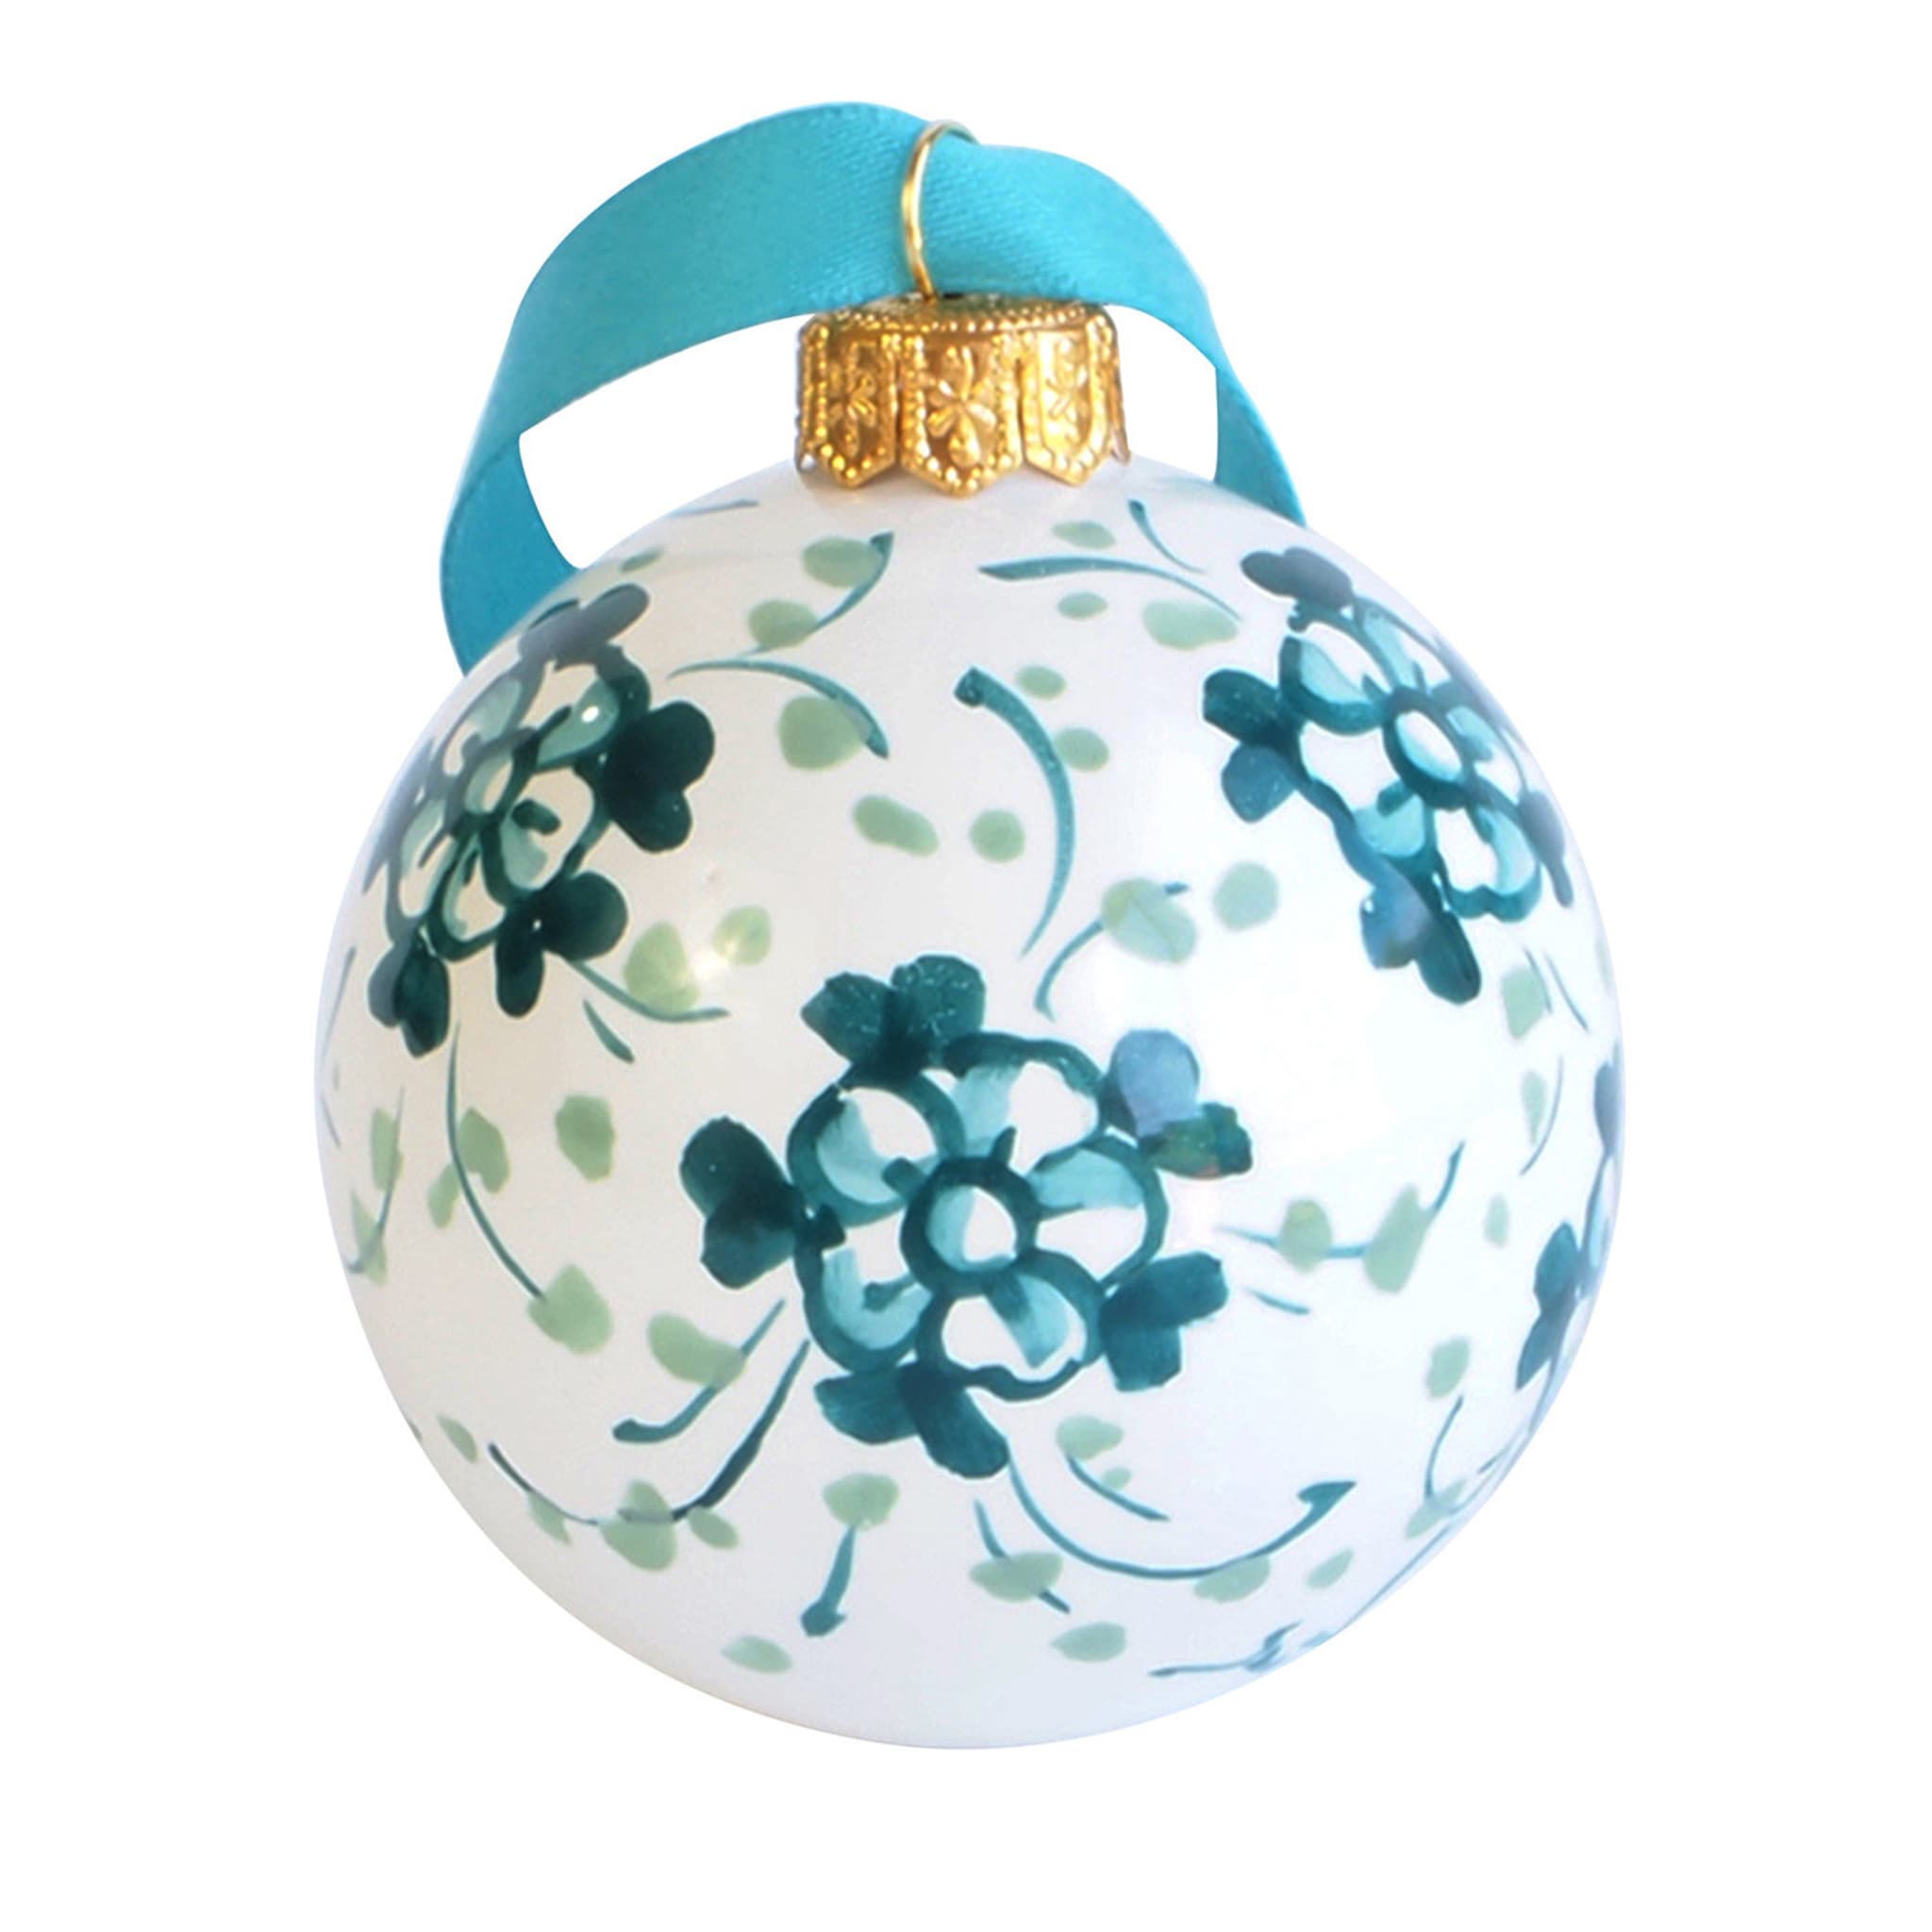 Turquoise Floral Christmas Ball Ornament #1 - Main view